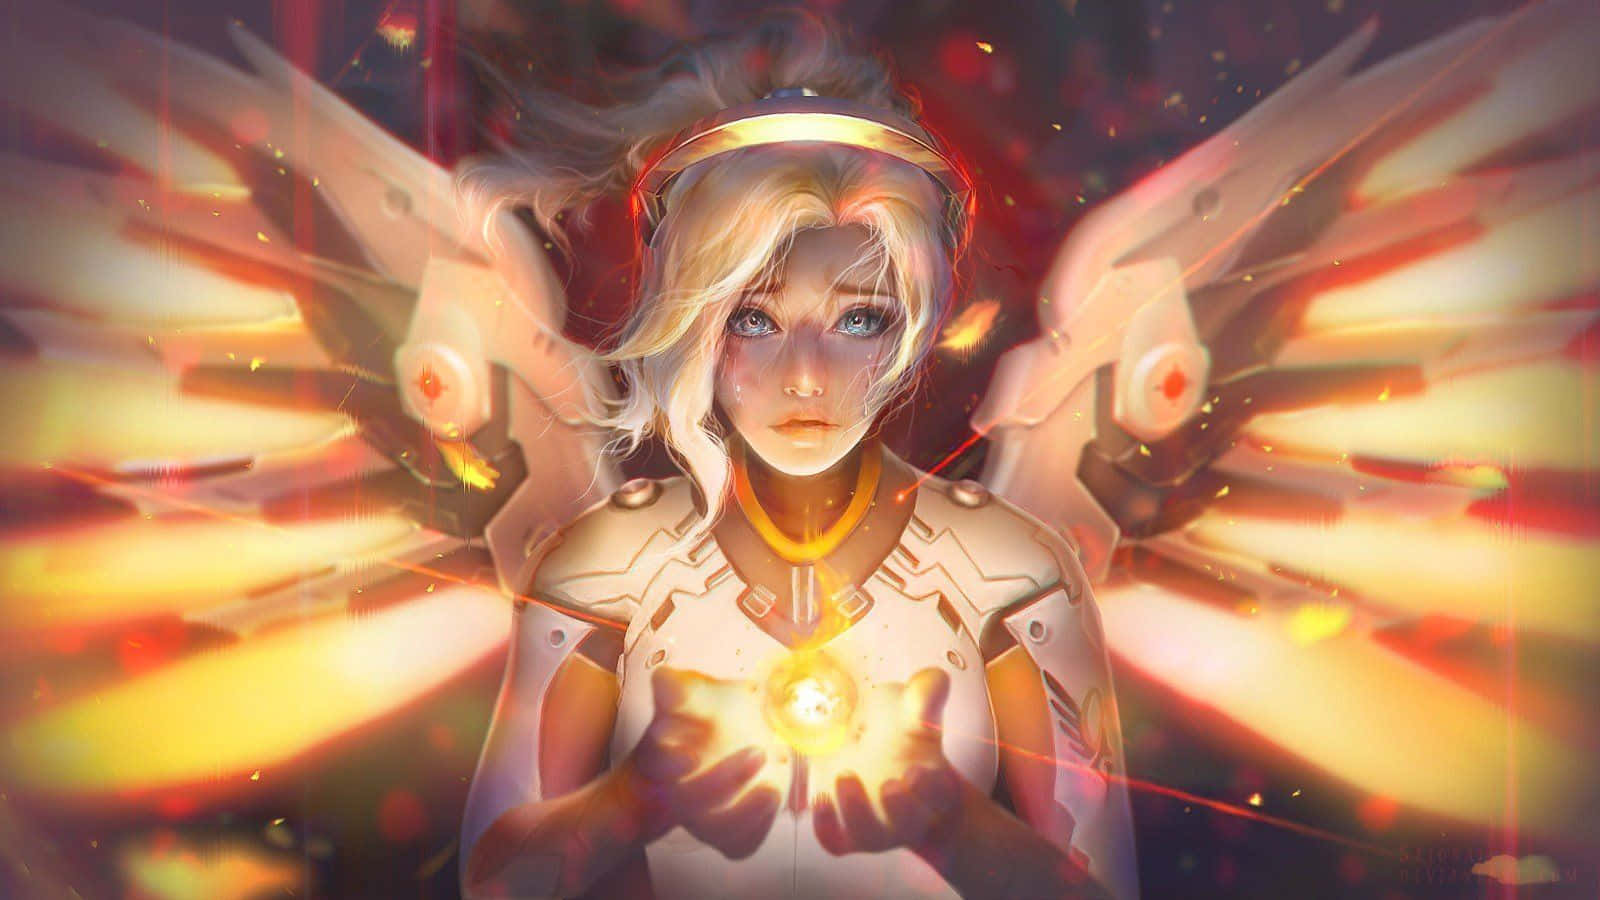 "Keep calm, for justice shall prevail" - Mercy Overwatch Wallpaper